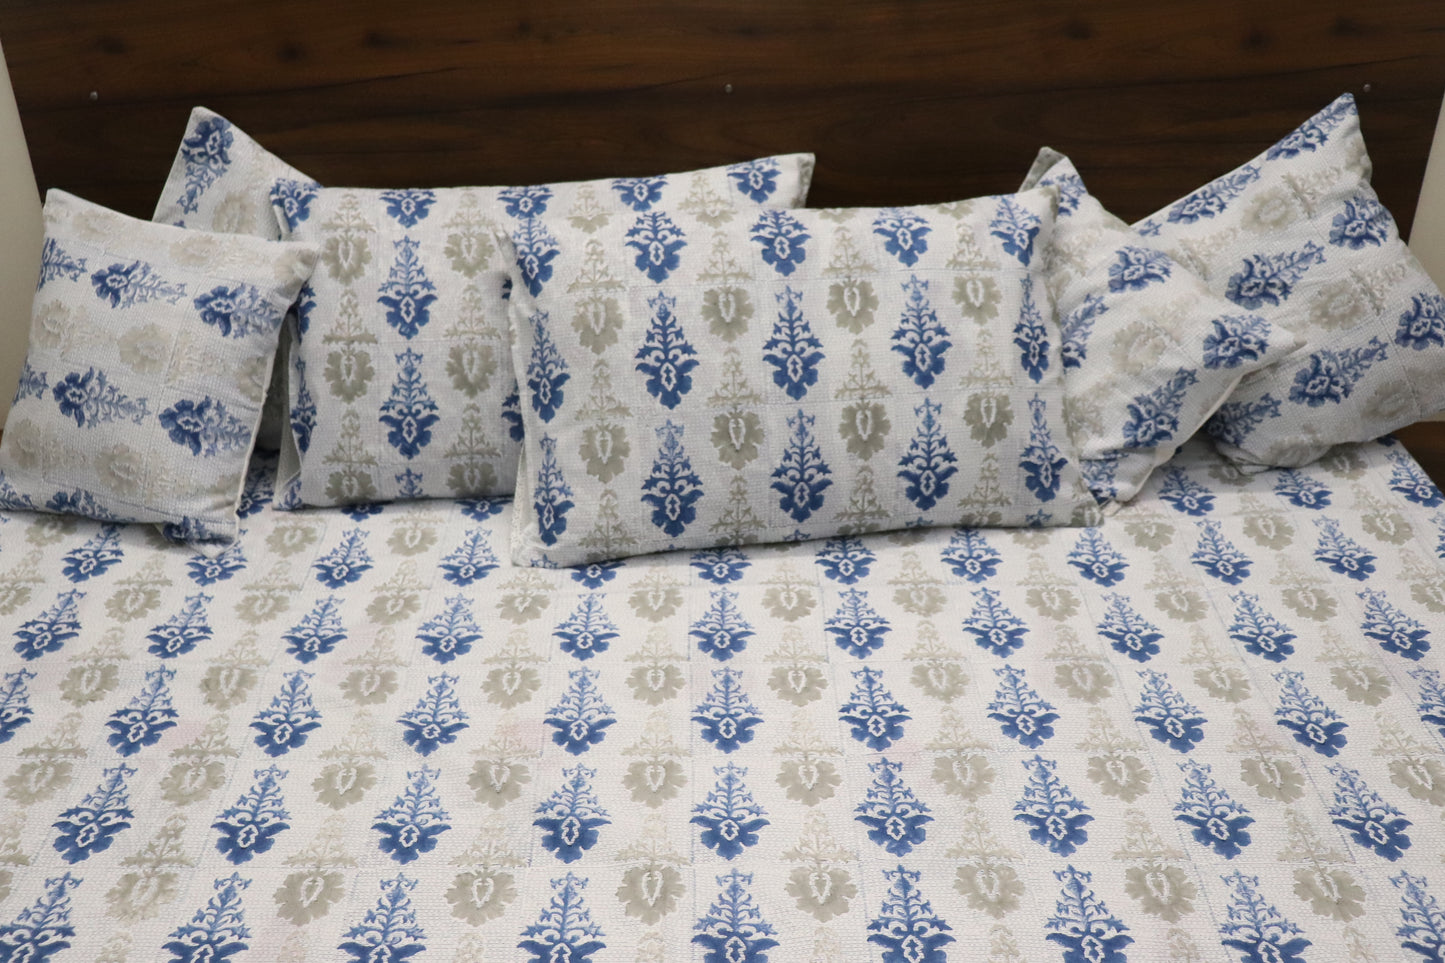 Ombre Block Print Cotton Bed Sheet with Pillow and Cushion Sets